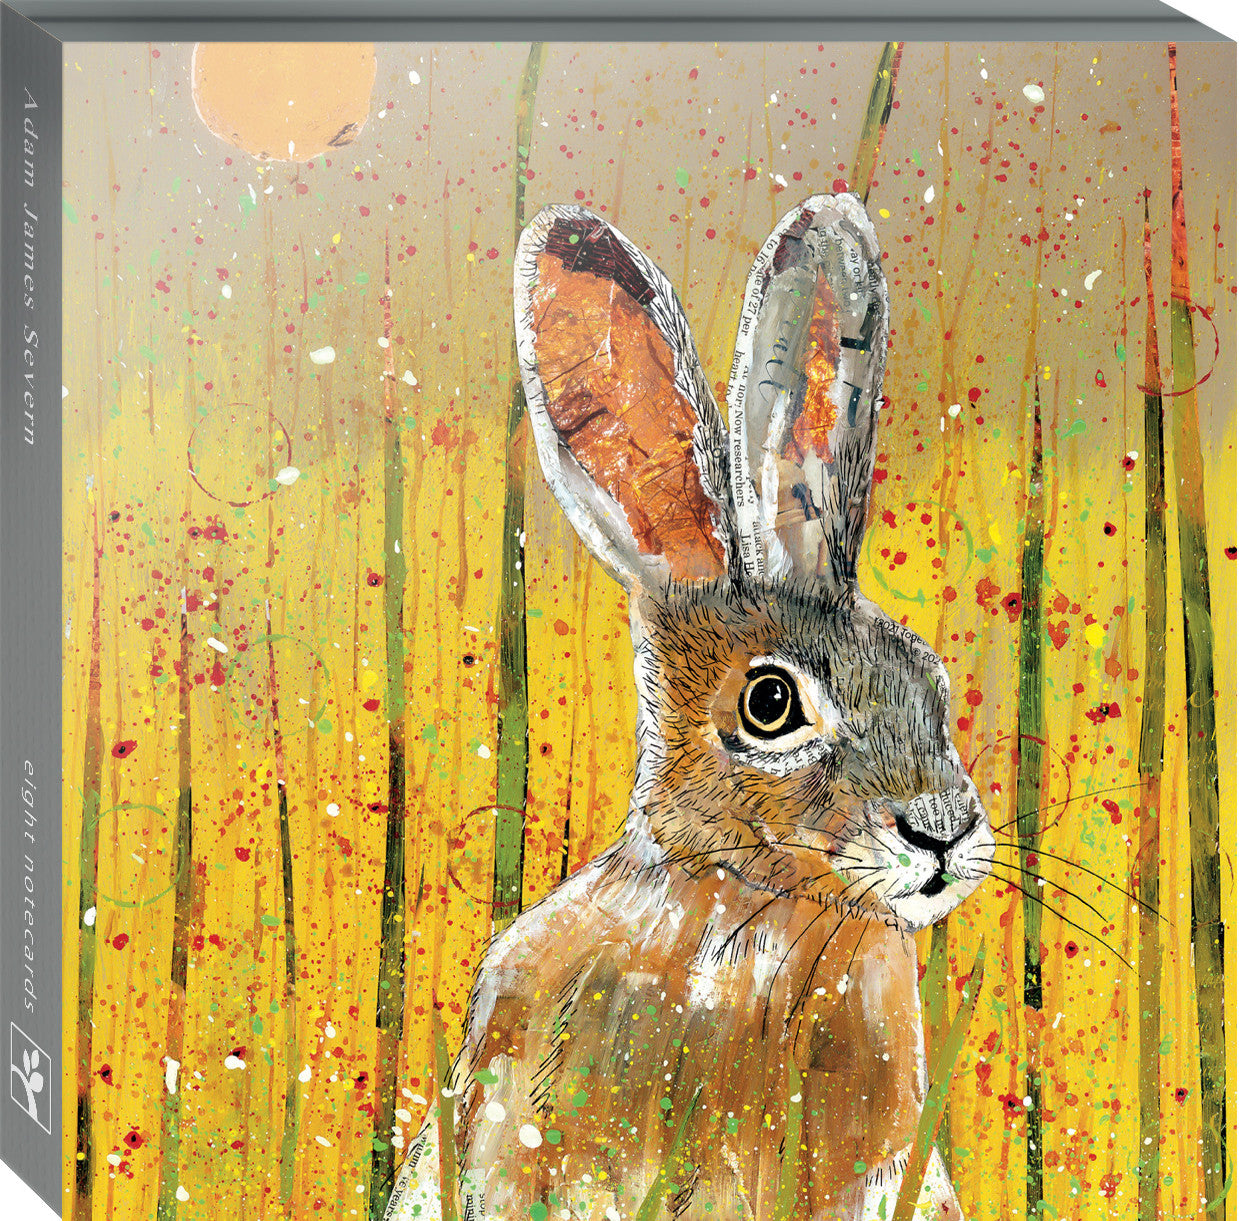 Blank multipack of greeting cards with artwork by Adam James Severn